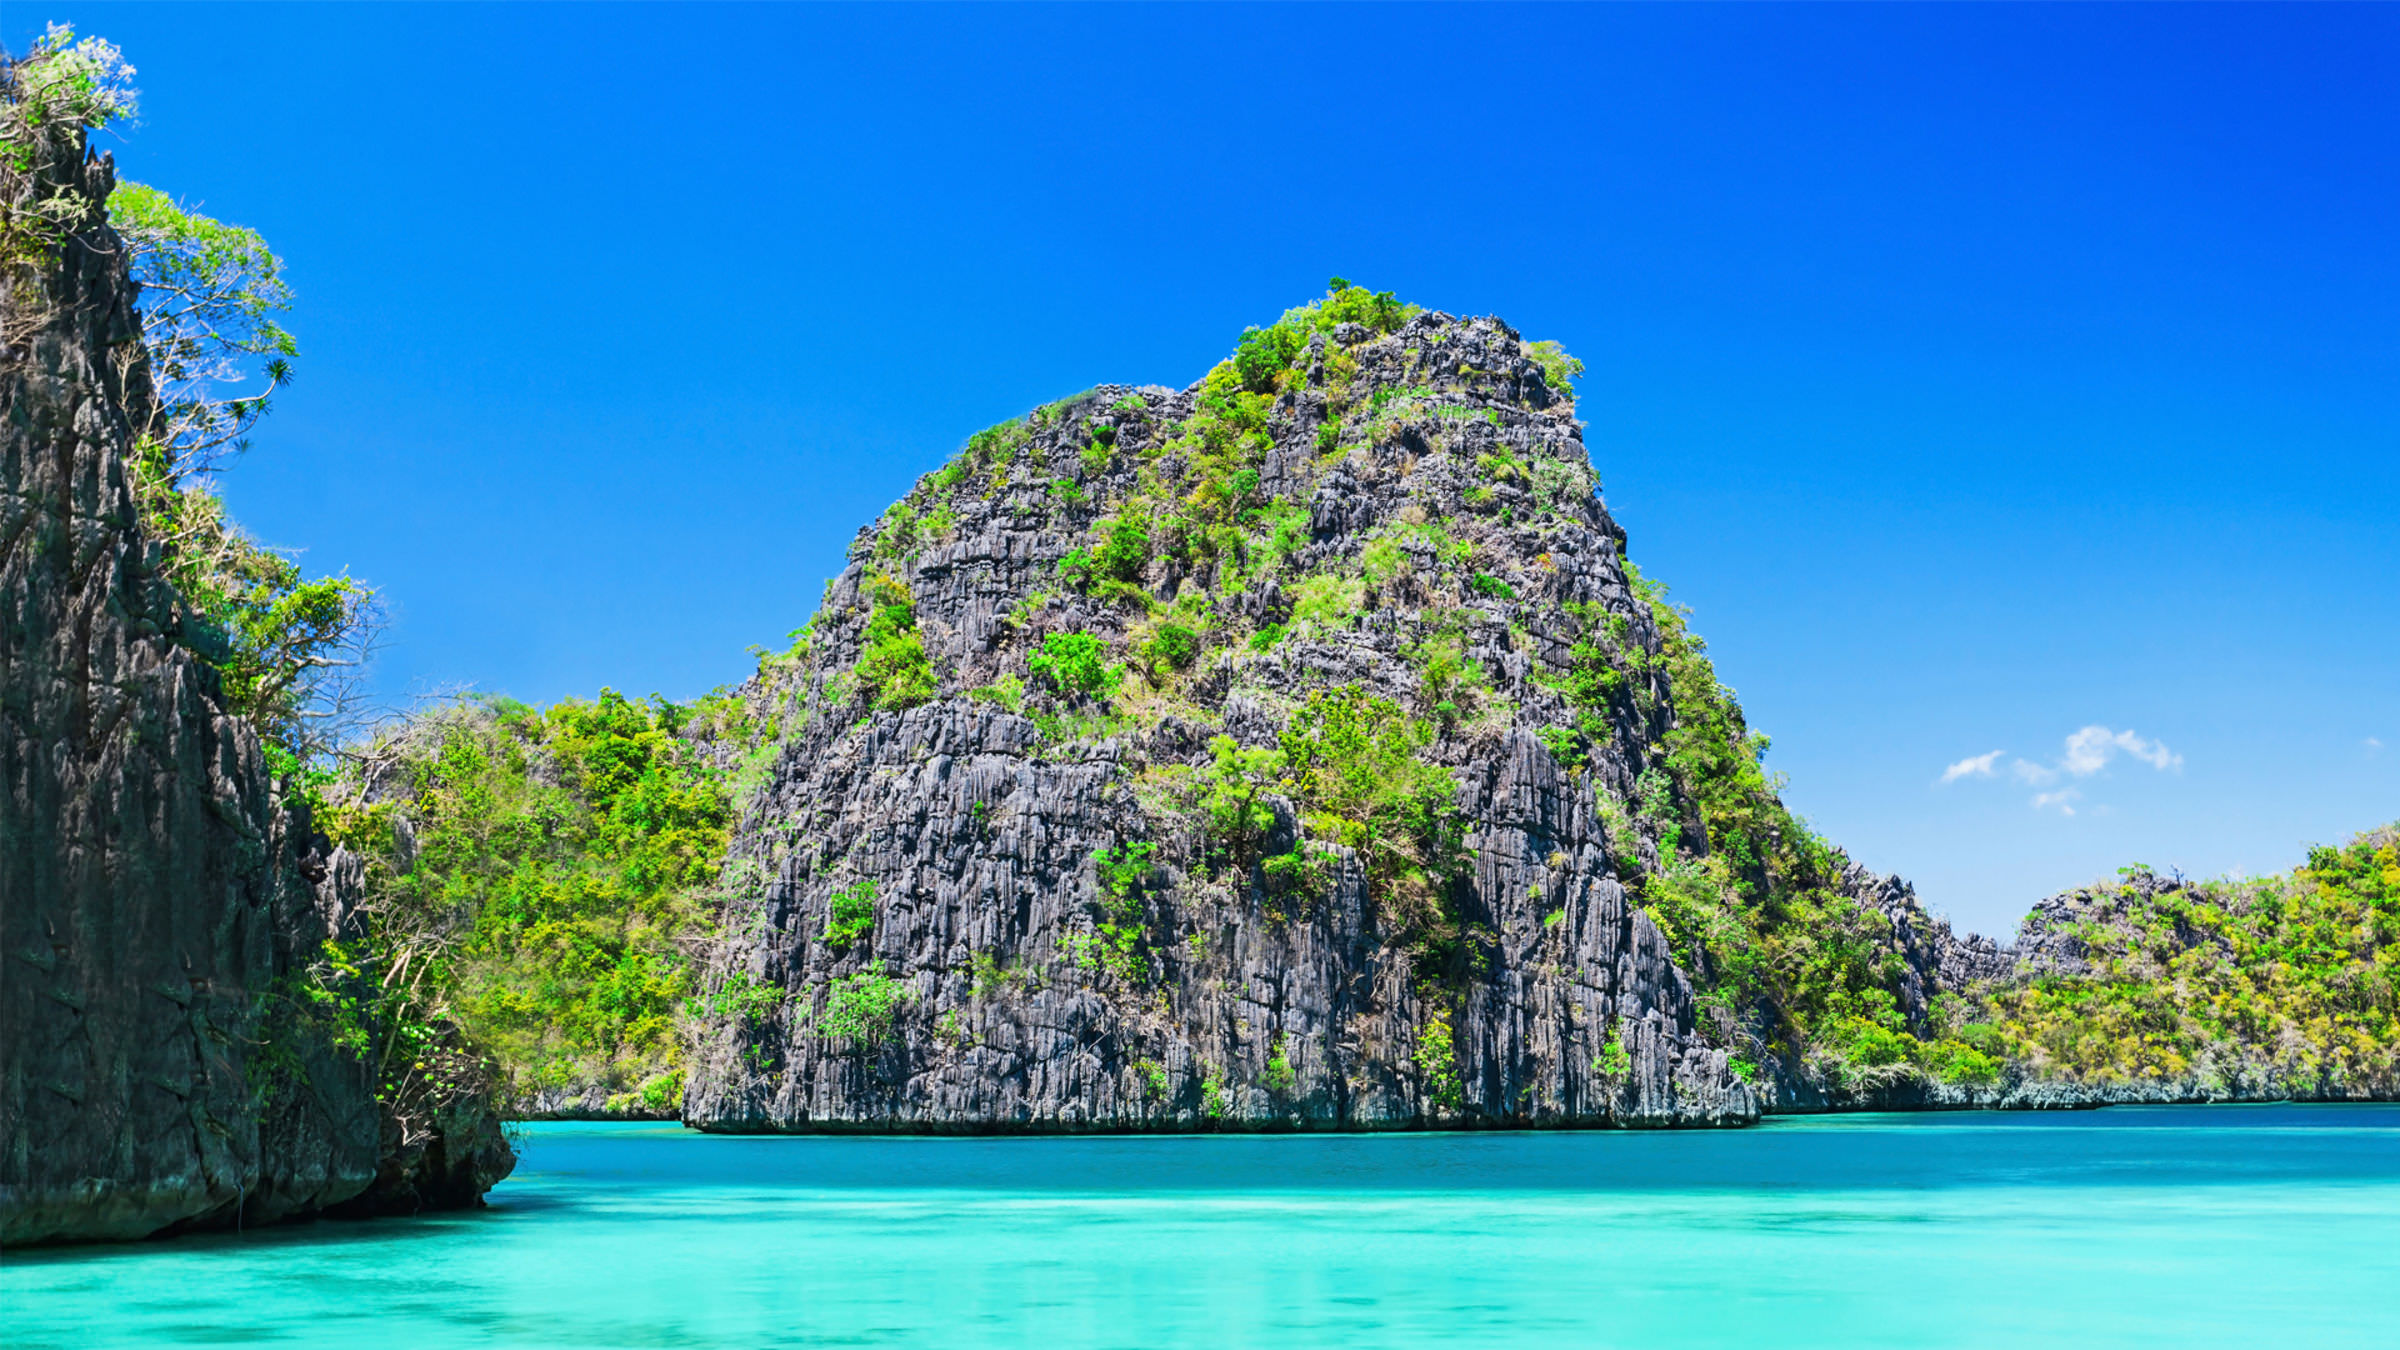 An ideal 6 nights Philippines itinerary for a family getaway